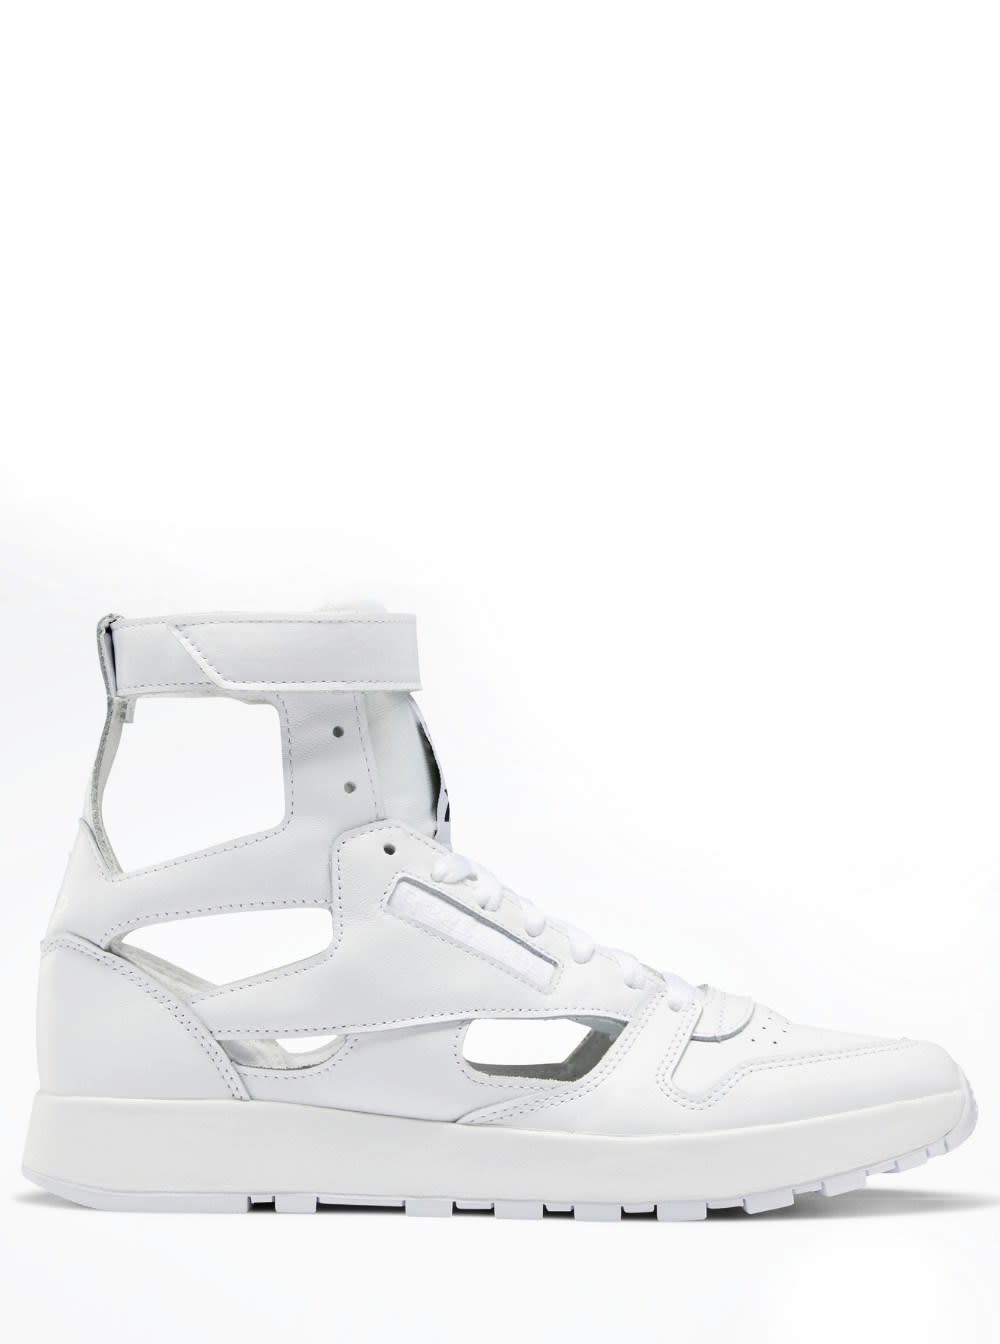 Buy Maison Margiela Mm X Reebok Classic Tabi Sneakers In White Leather online, shop Maison Margiela shoes with free shipping